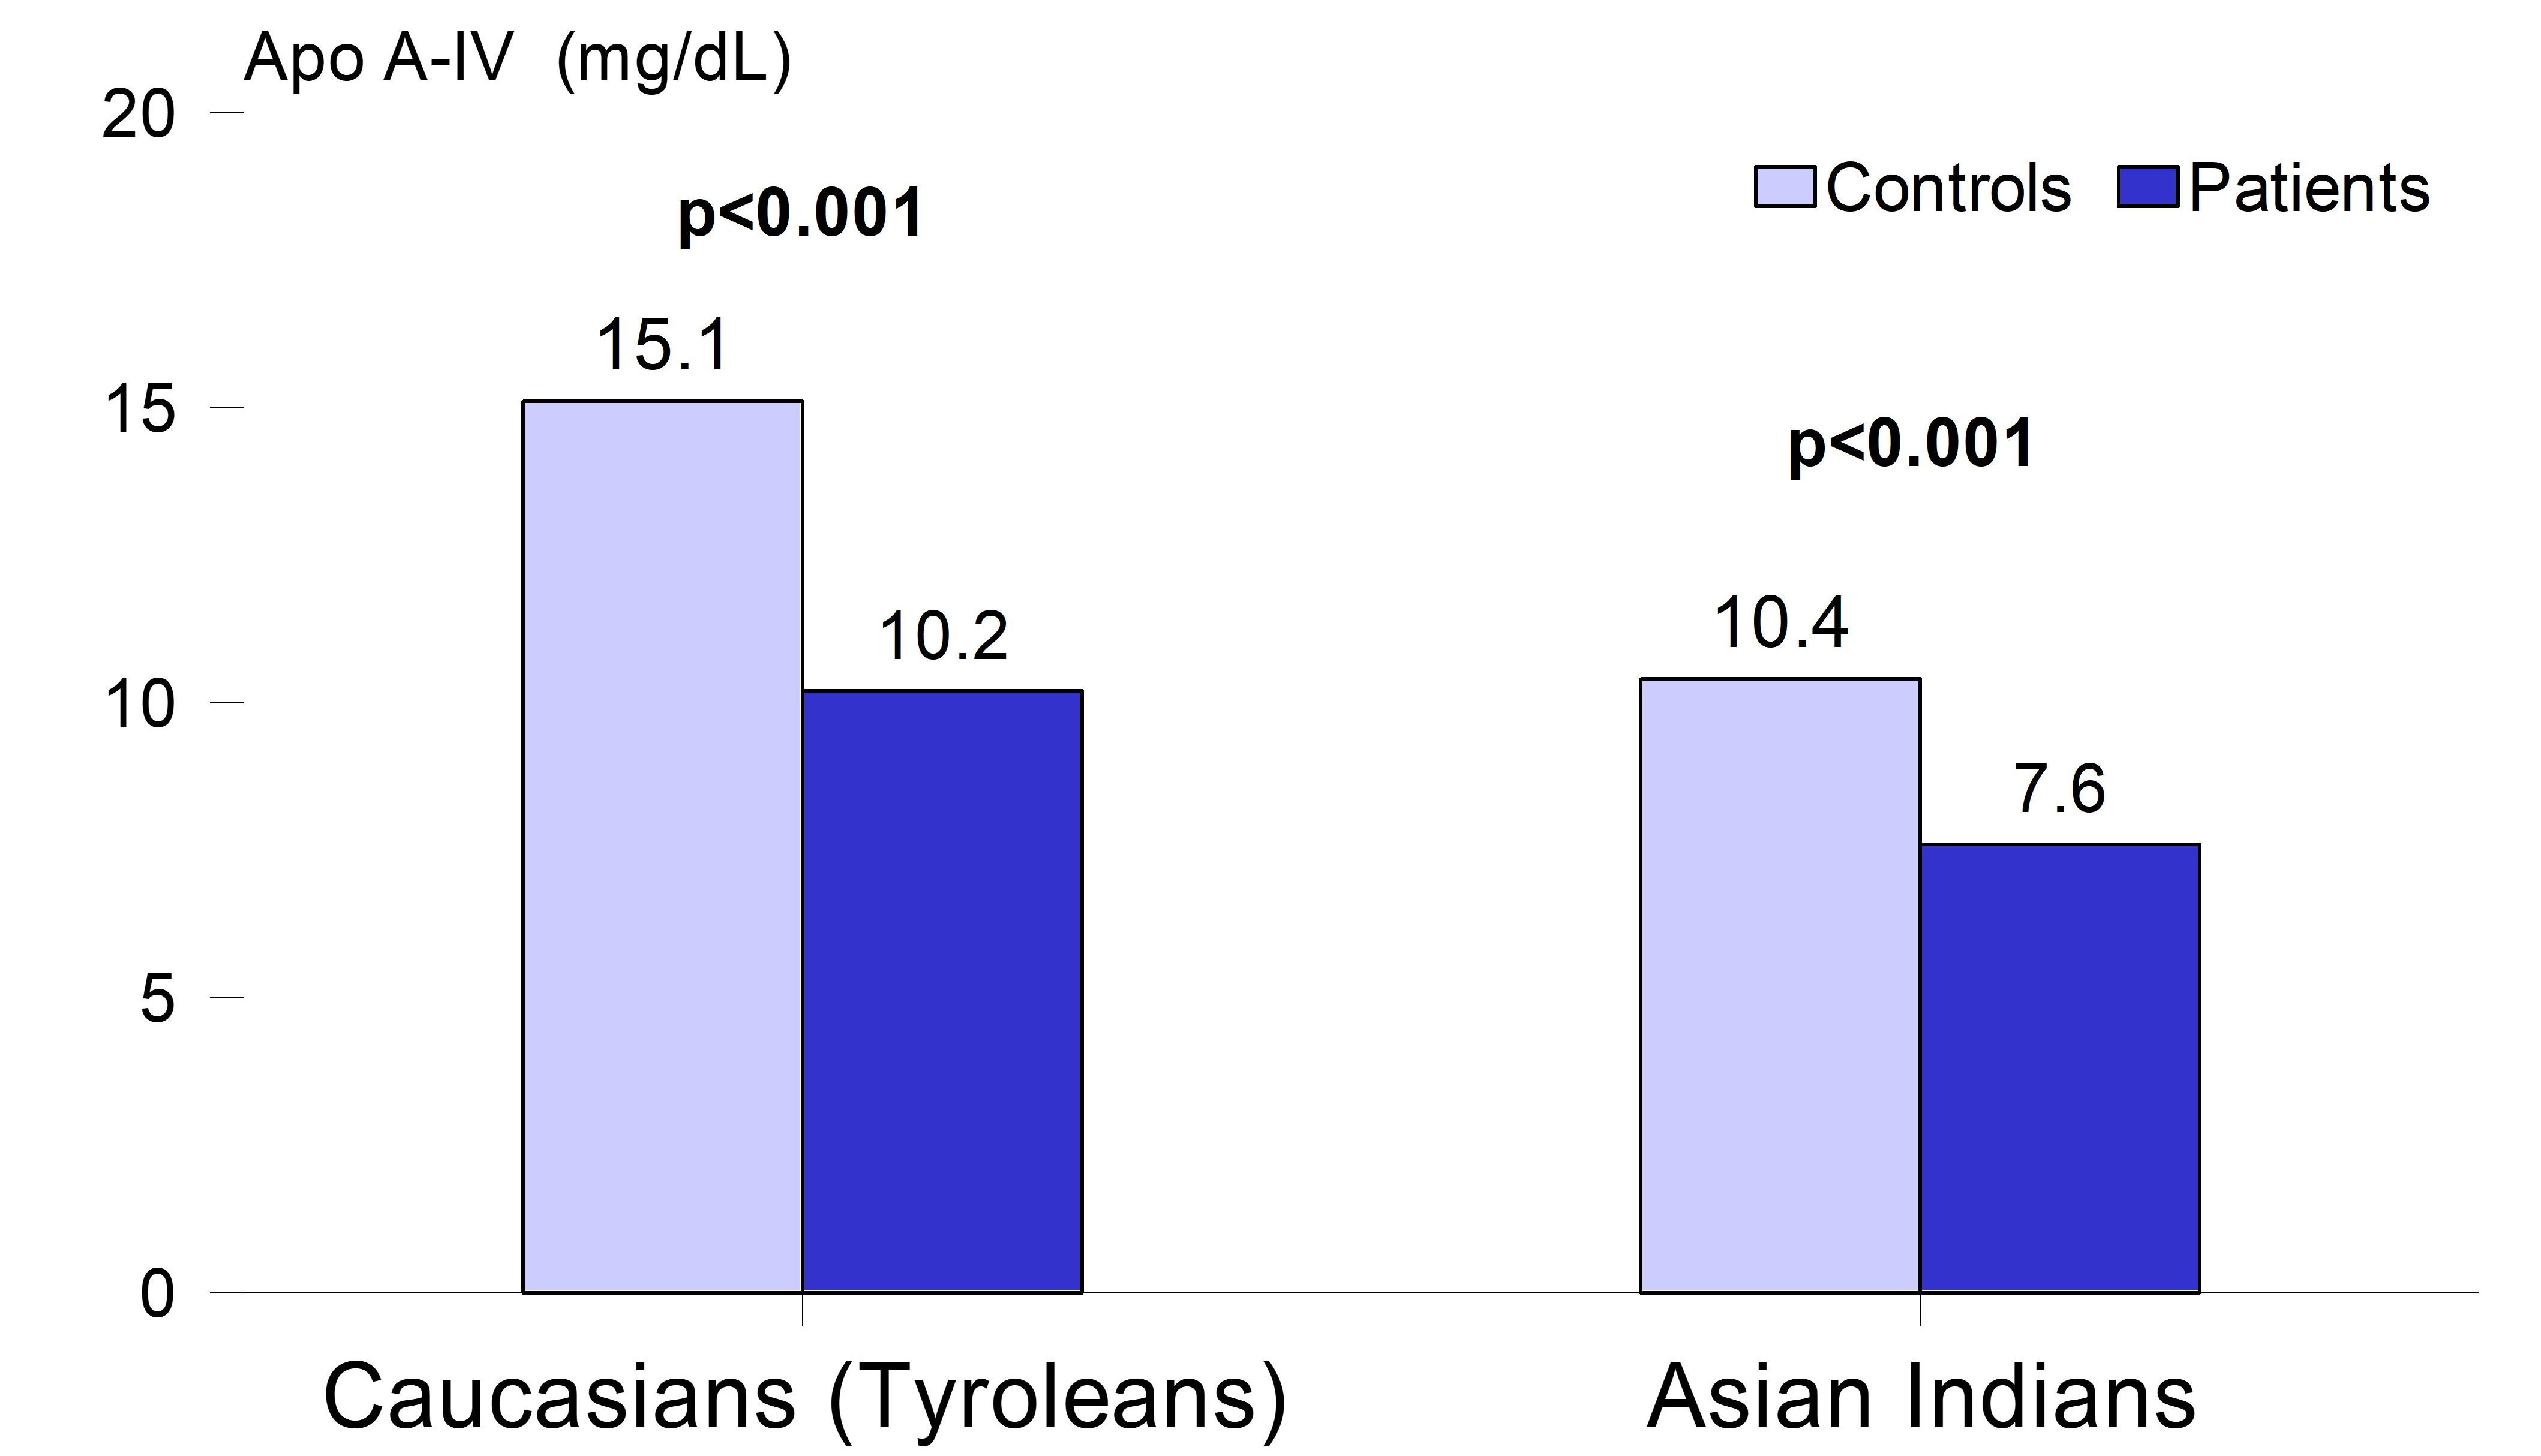 Figure 1: ApoA-IV plasma concentrations in patients with coronary artery disease and healthy controls. Data are provided for a Caucasian as well as an Asian Indian group of patients and controls (Kronenberg et al.: J. Am. Coll. Cardiol. 2000).